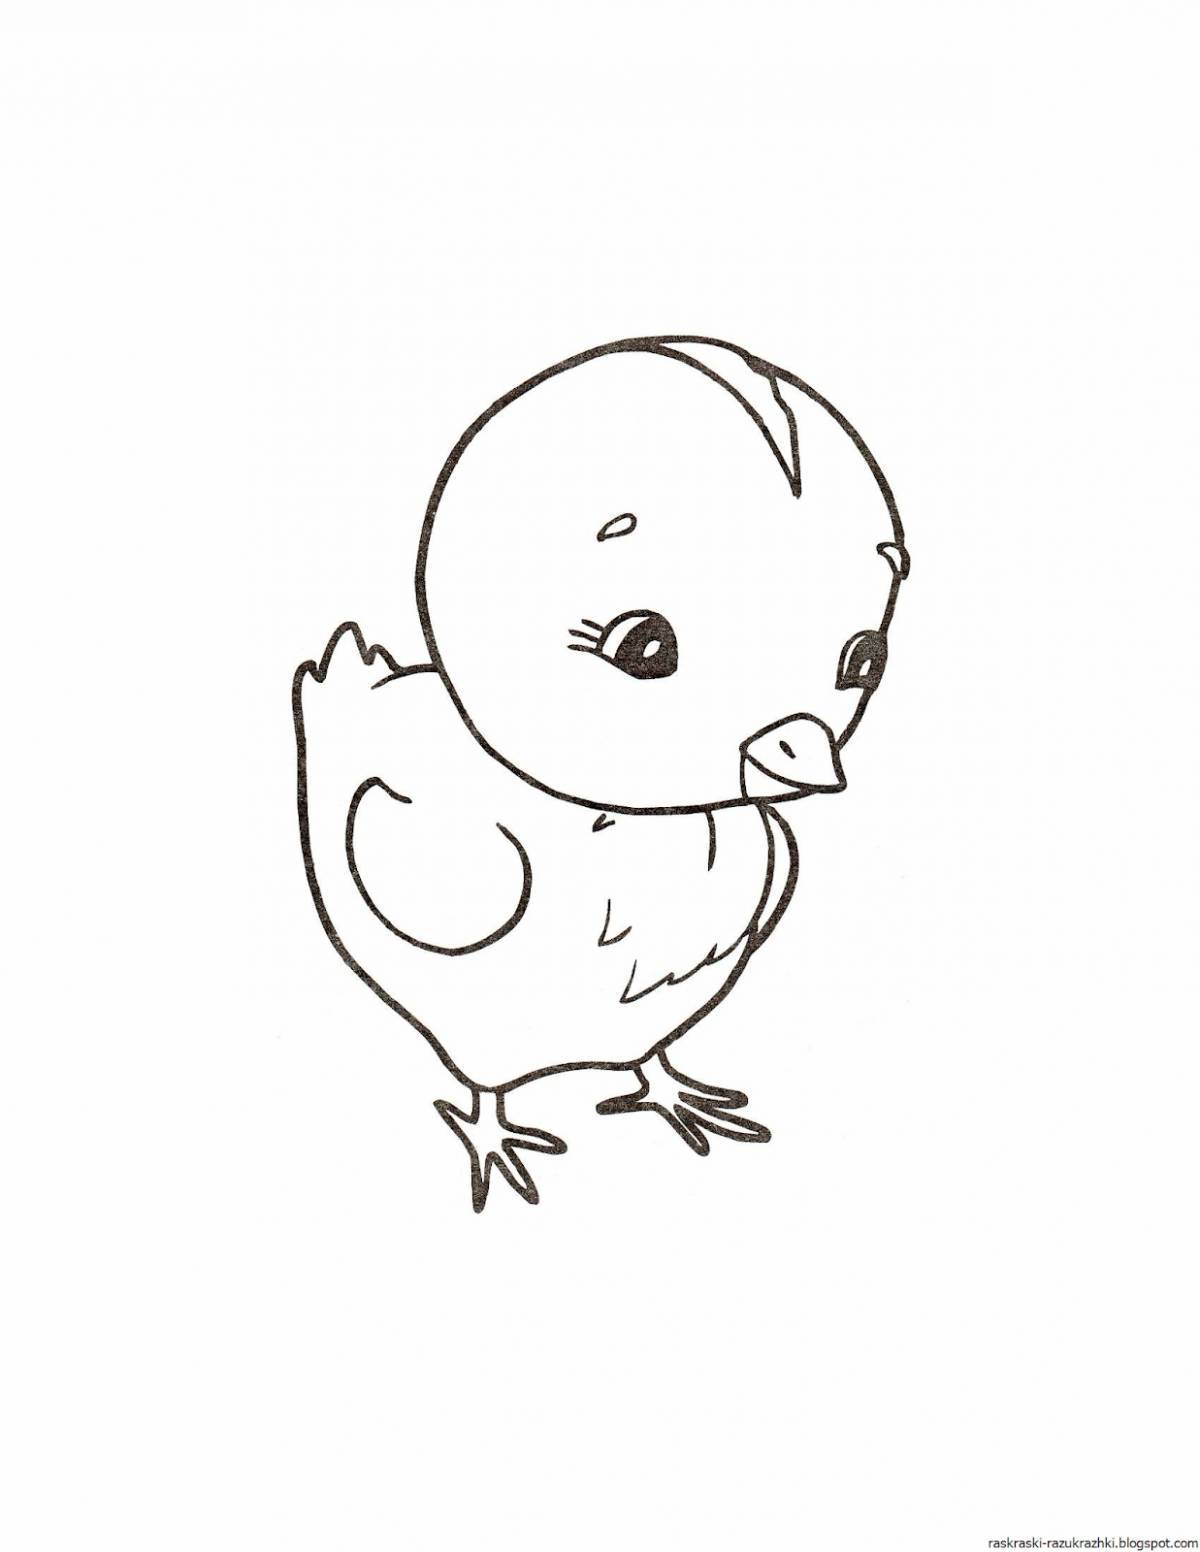 Coloring cute chick for kids